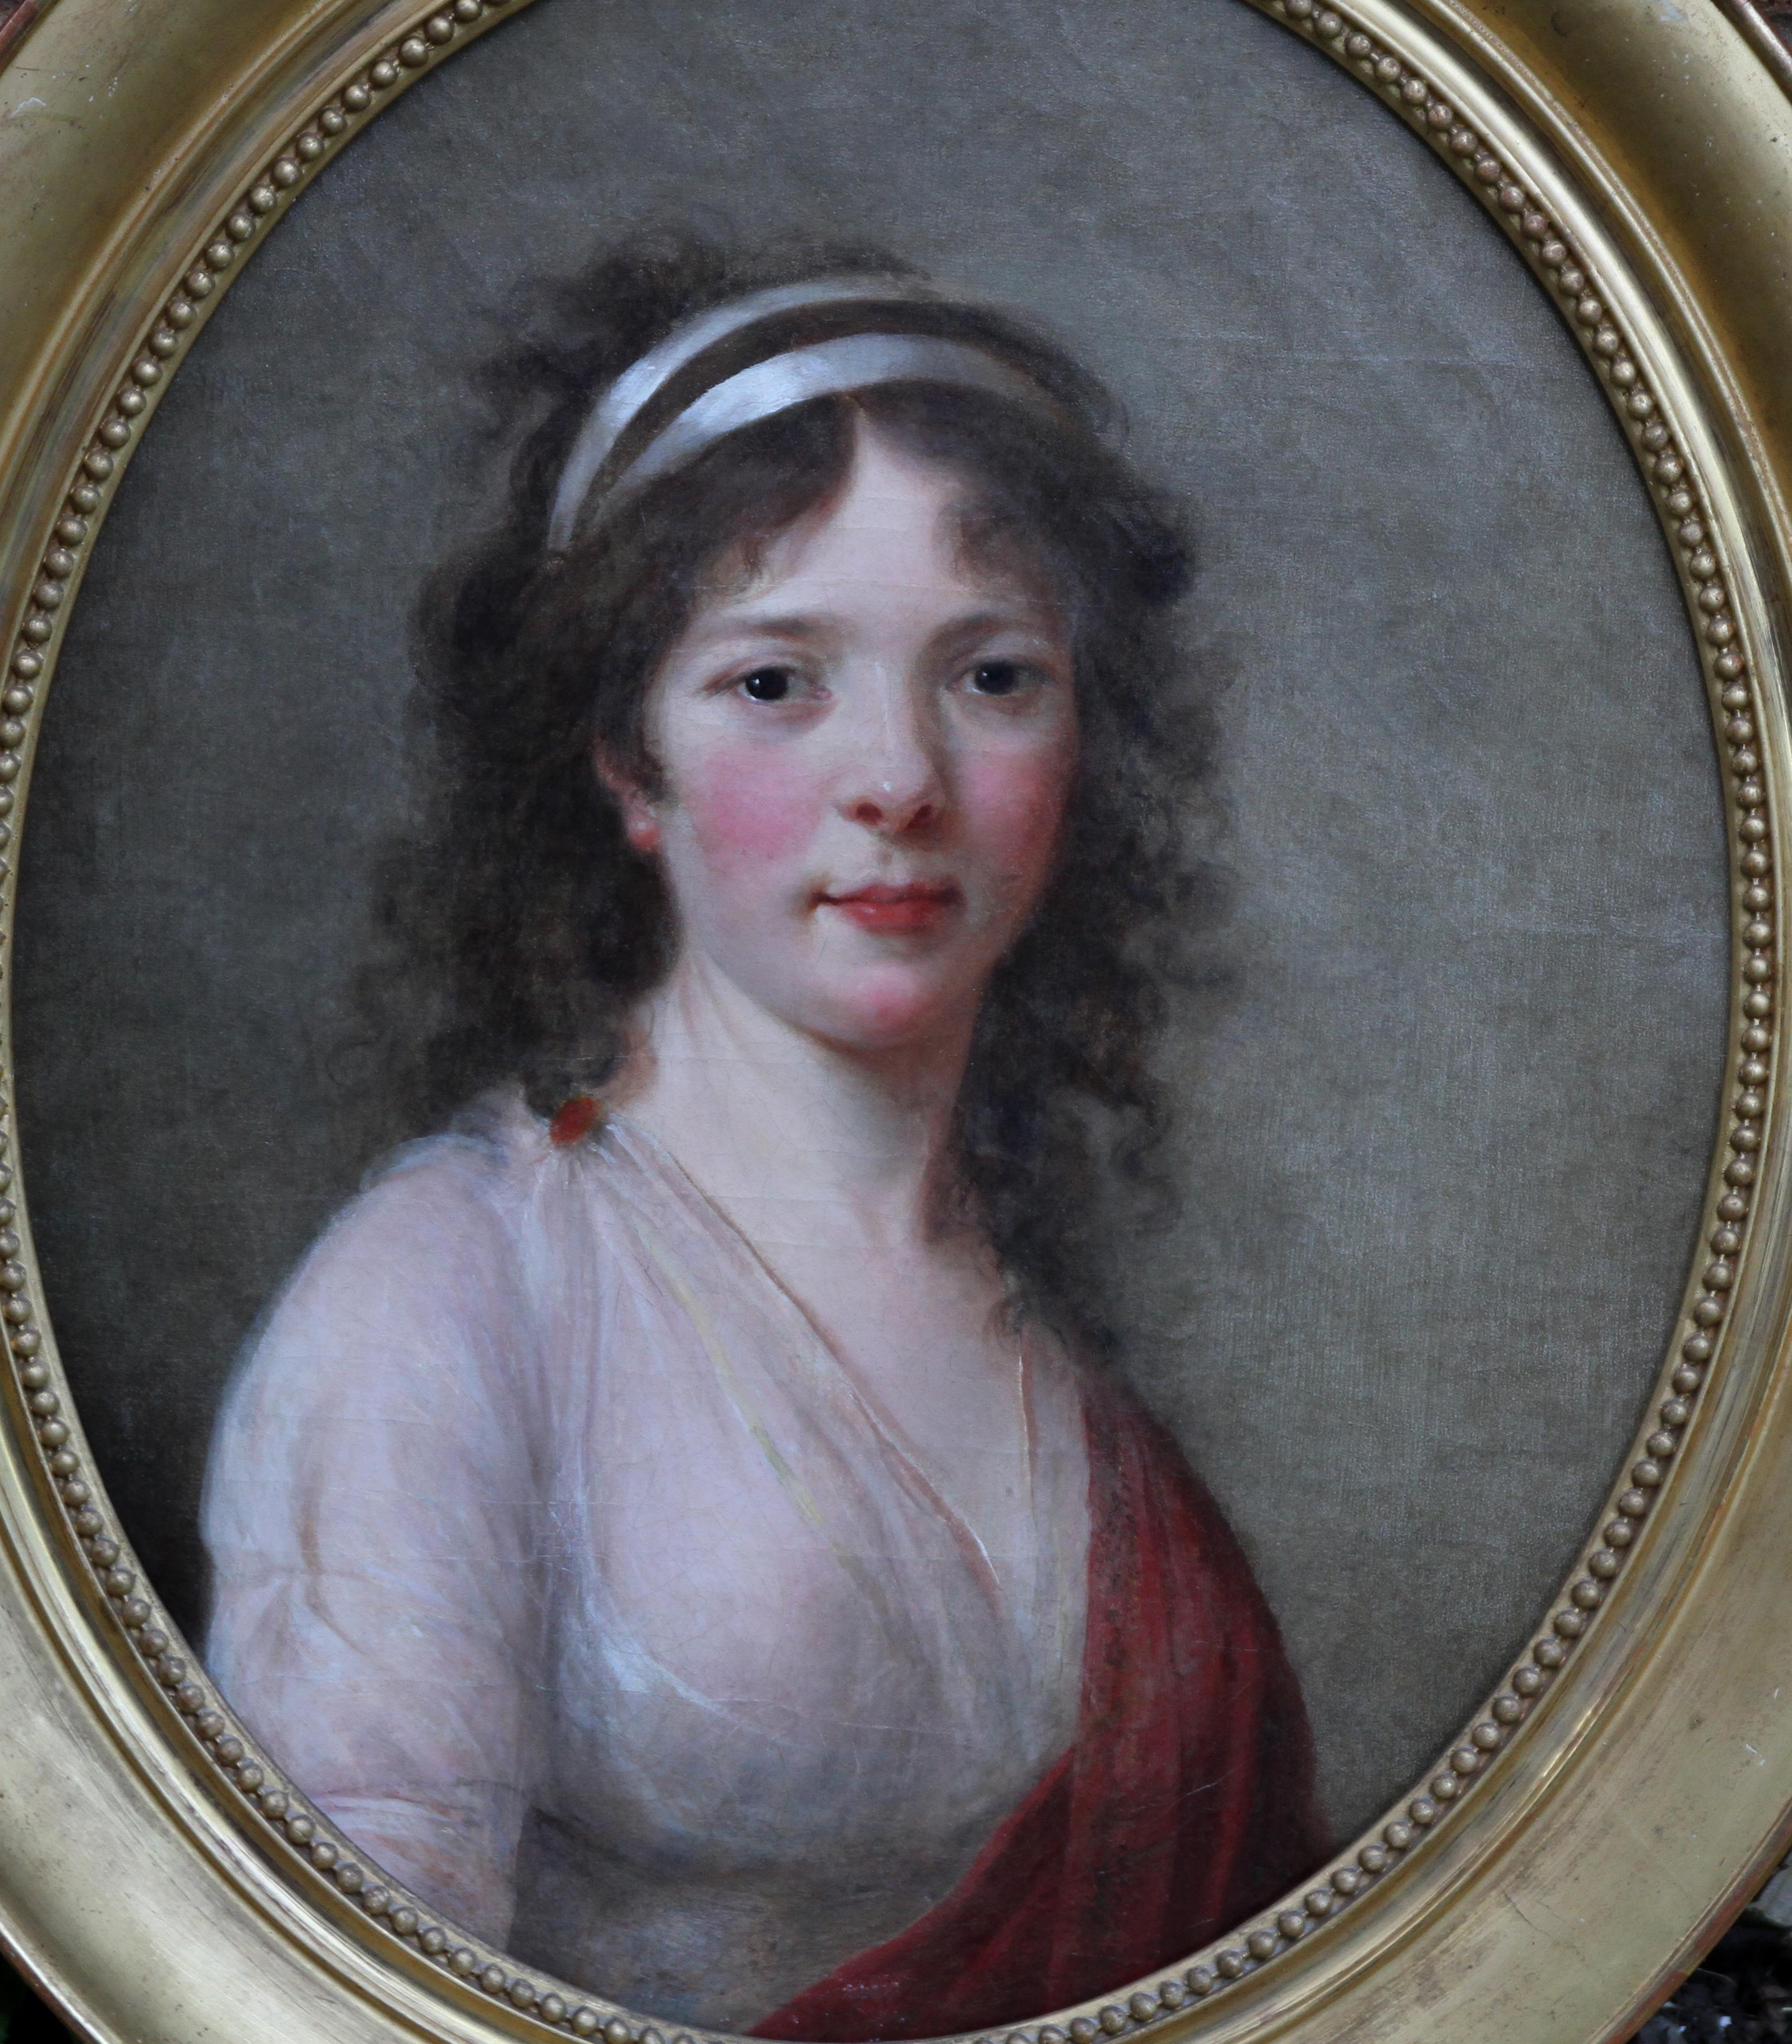 This fine French Old Master portrait oil painting on canvas dates to circa 1770 and is attributed to the circle of Elizabeth Vigee Le Brun. The sitter is Madam van Robais. 
The van Robais family is a surviving French family, of Flemish origin, and